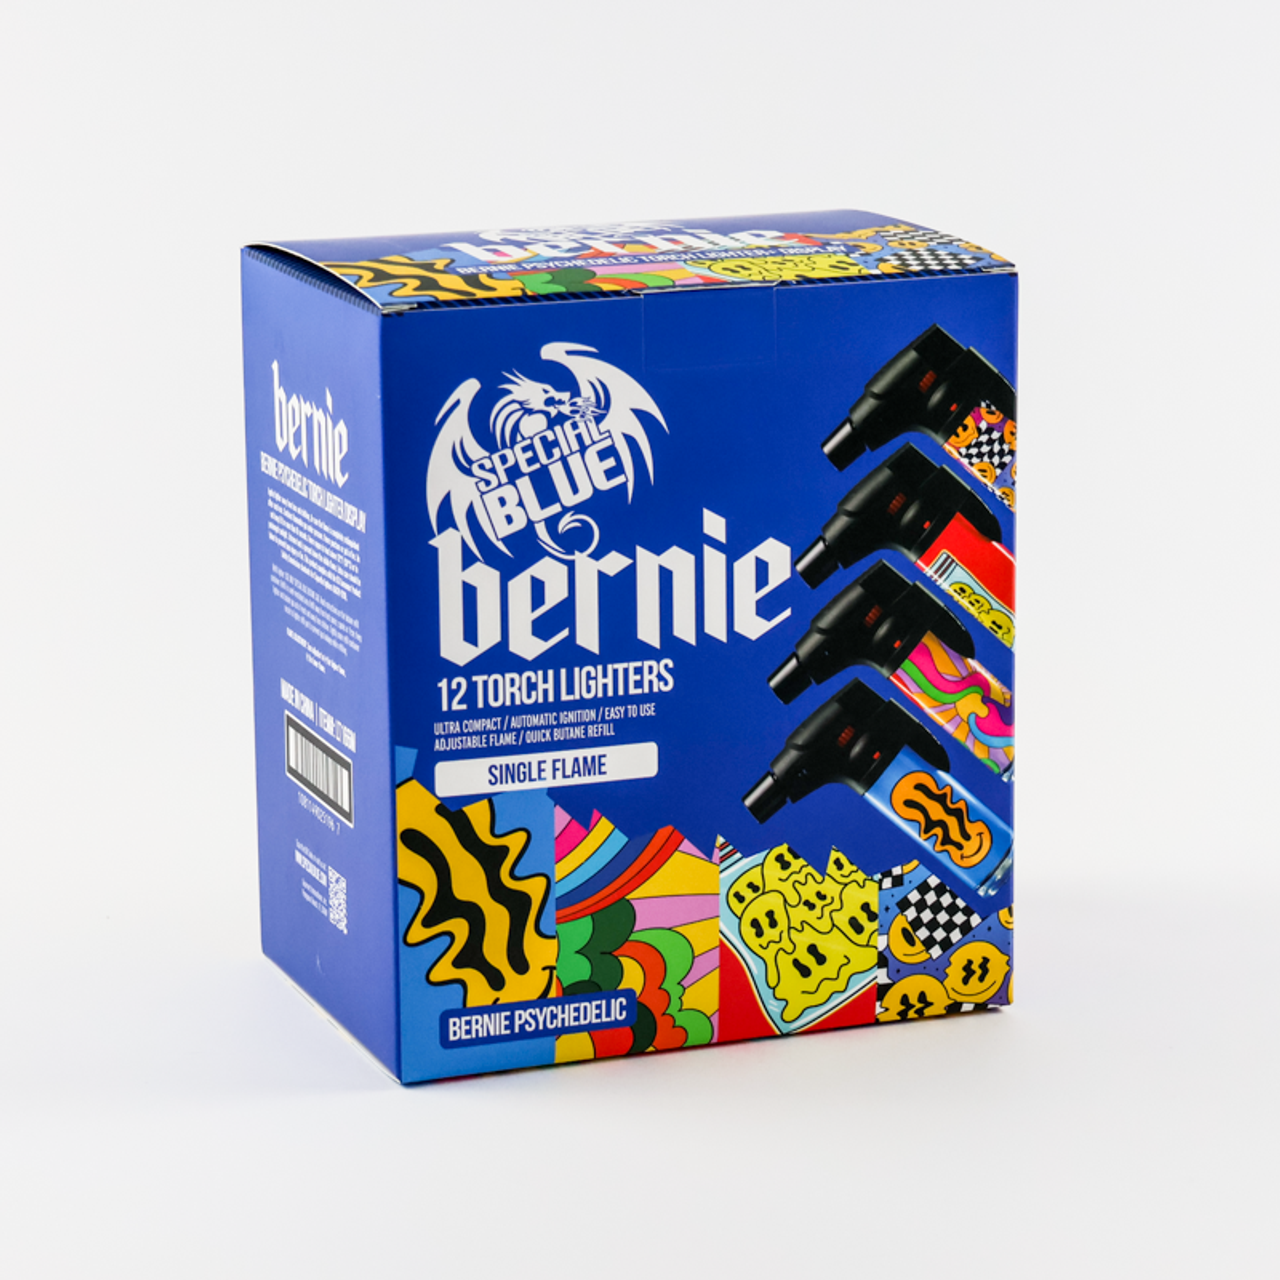 Special Blue Bernie Psychedelic Torch | Assorted Colors | 12 Pack Retail Display